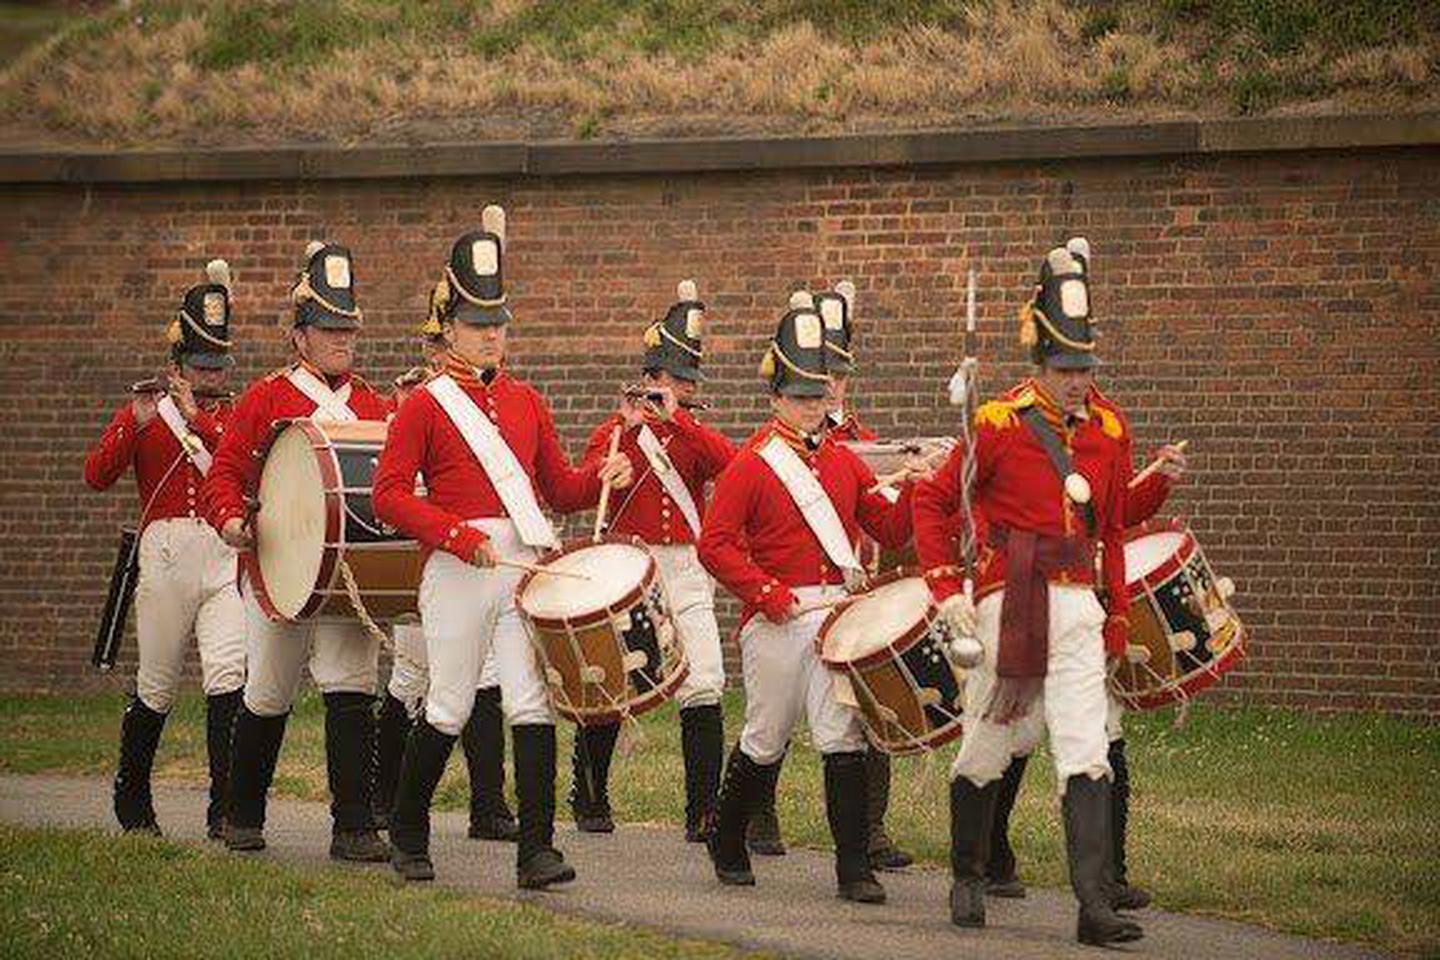 Fort McHenry GuardFife and Drum Corps at Fort McHenry